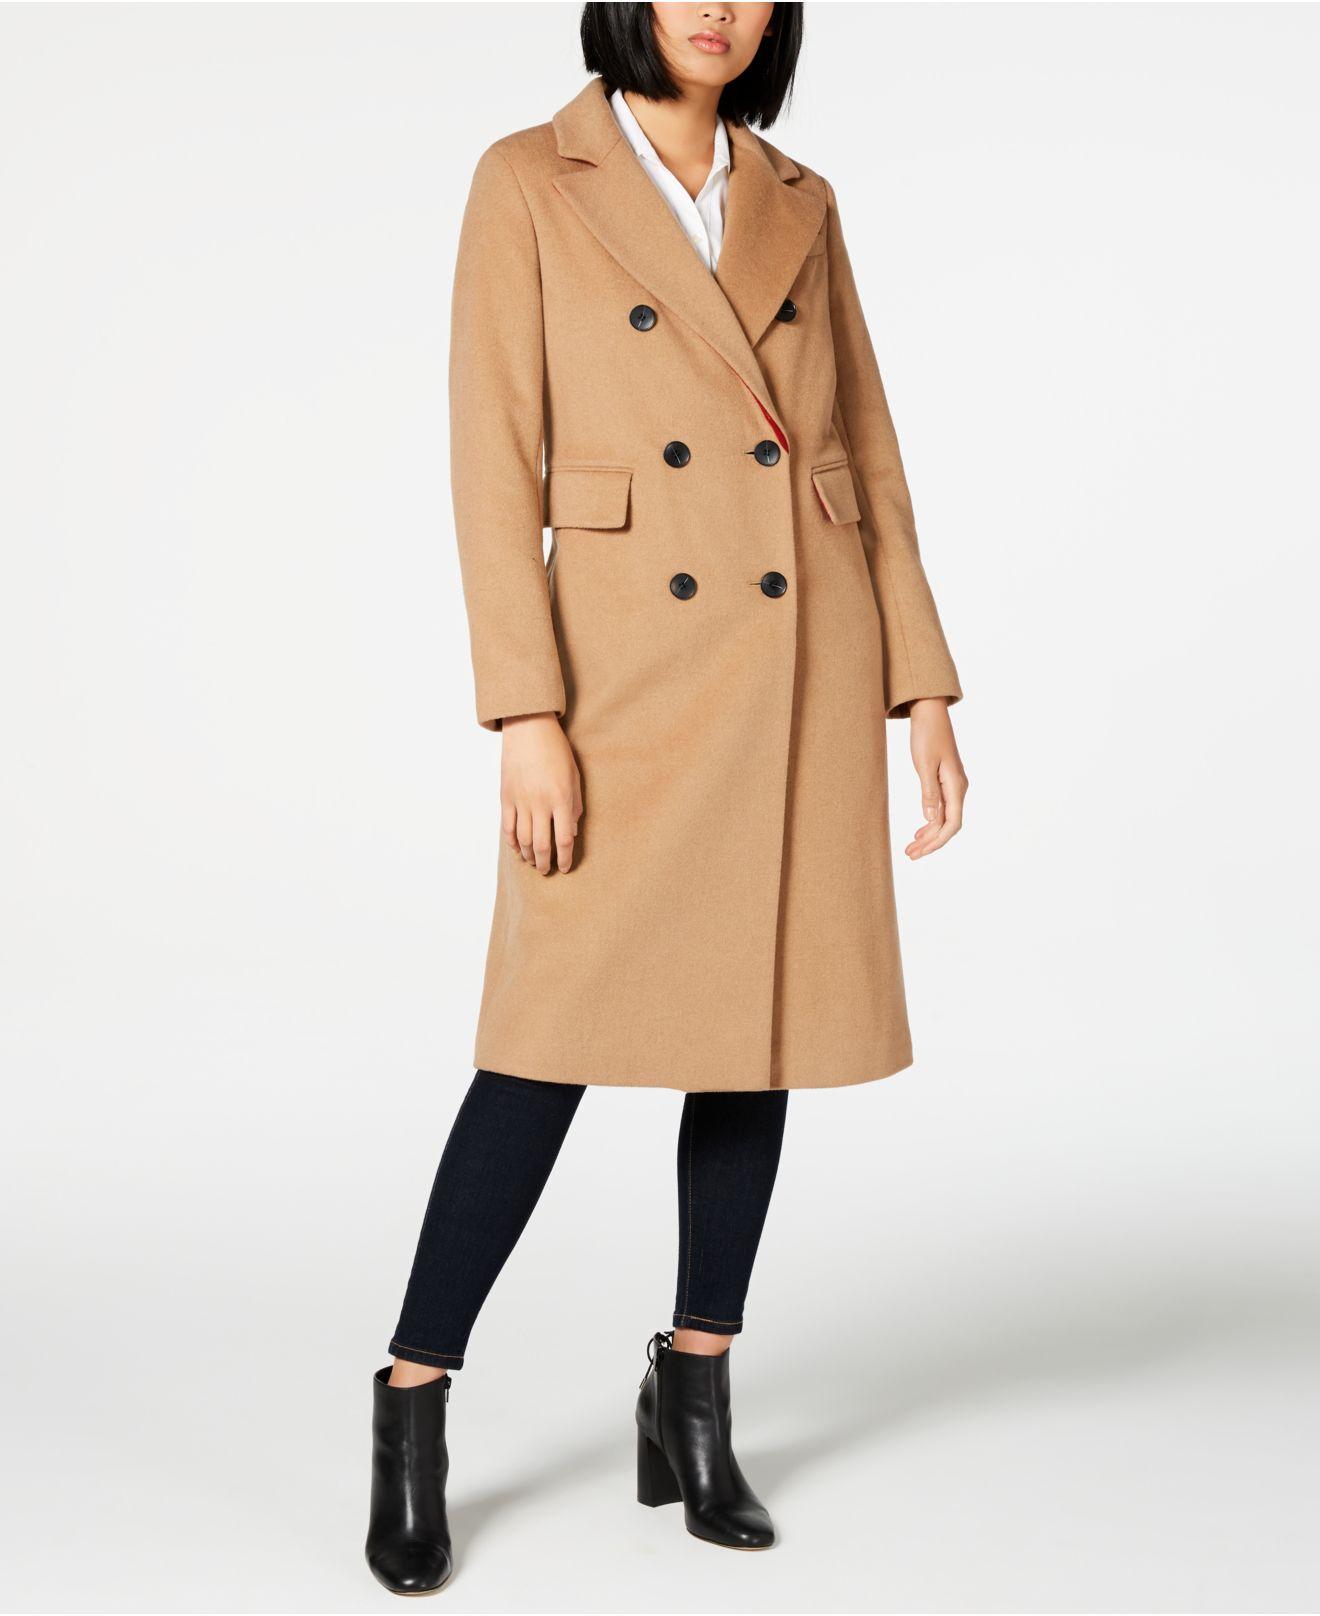 French Connection Wool Double-breasted Coat in Camel (Natural) - Lyst